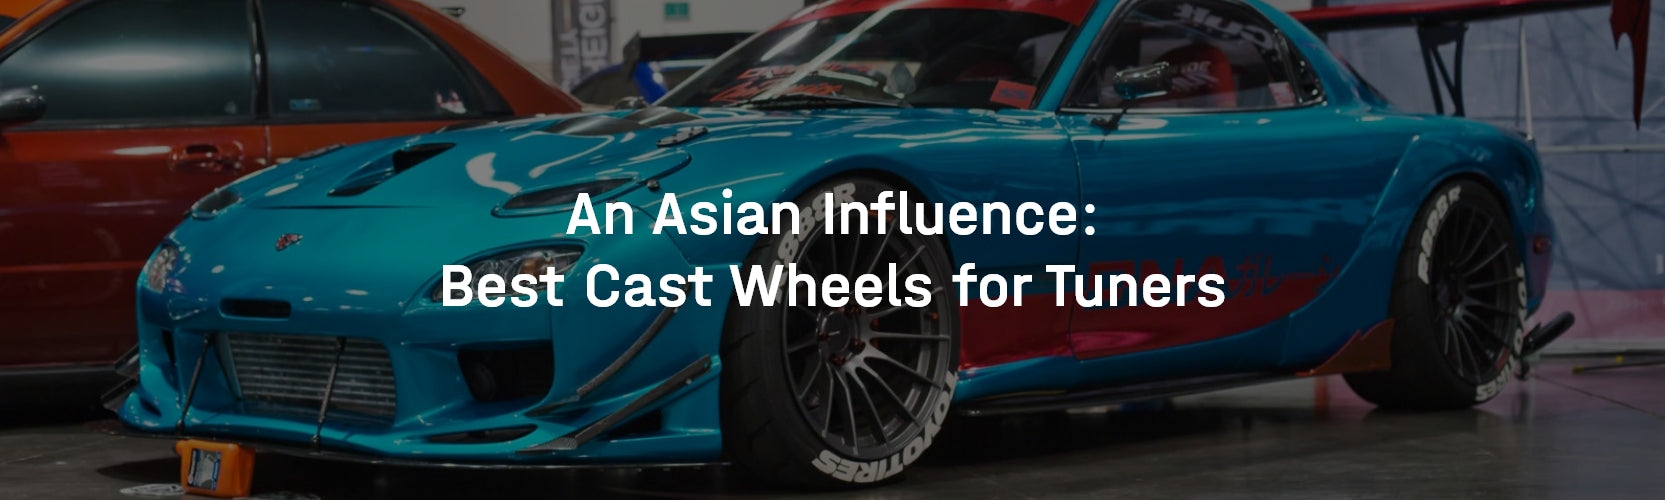 An Asian Influence: Best Cast Wheels for Tuners